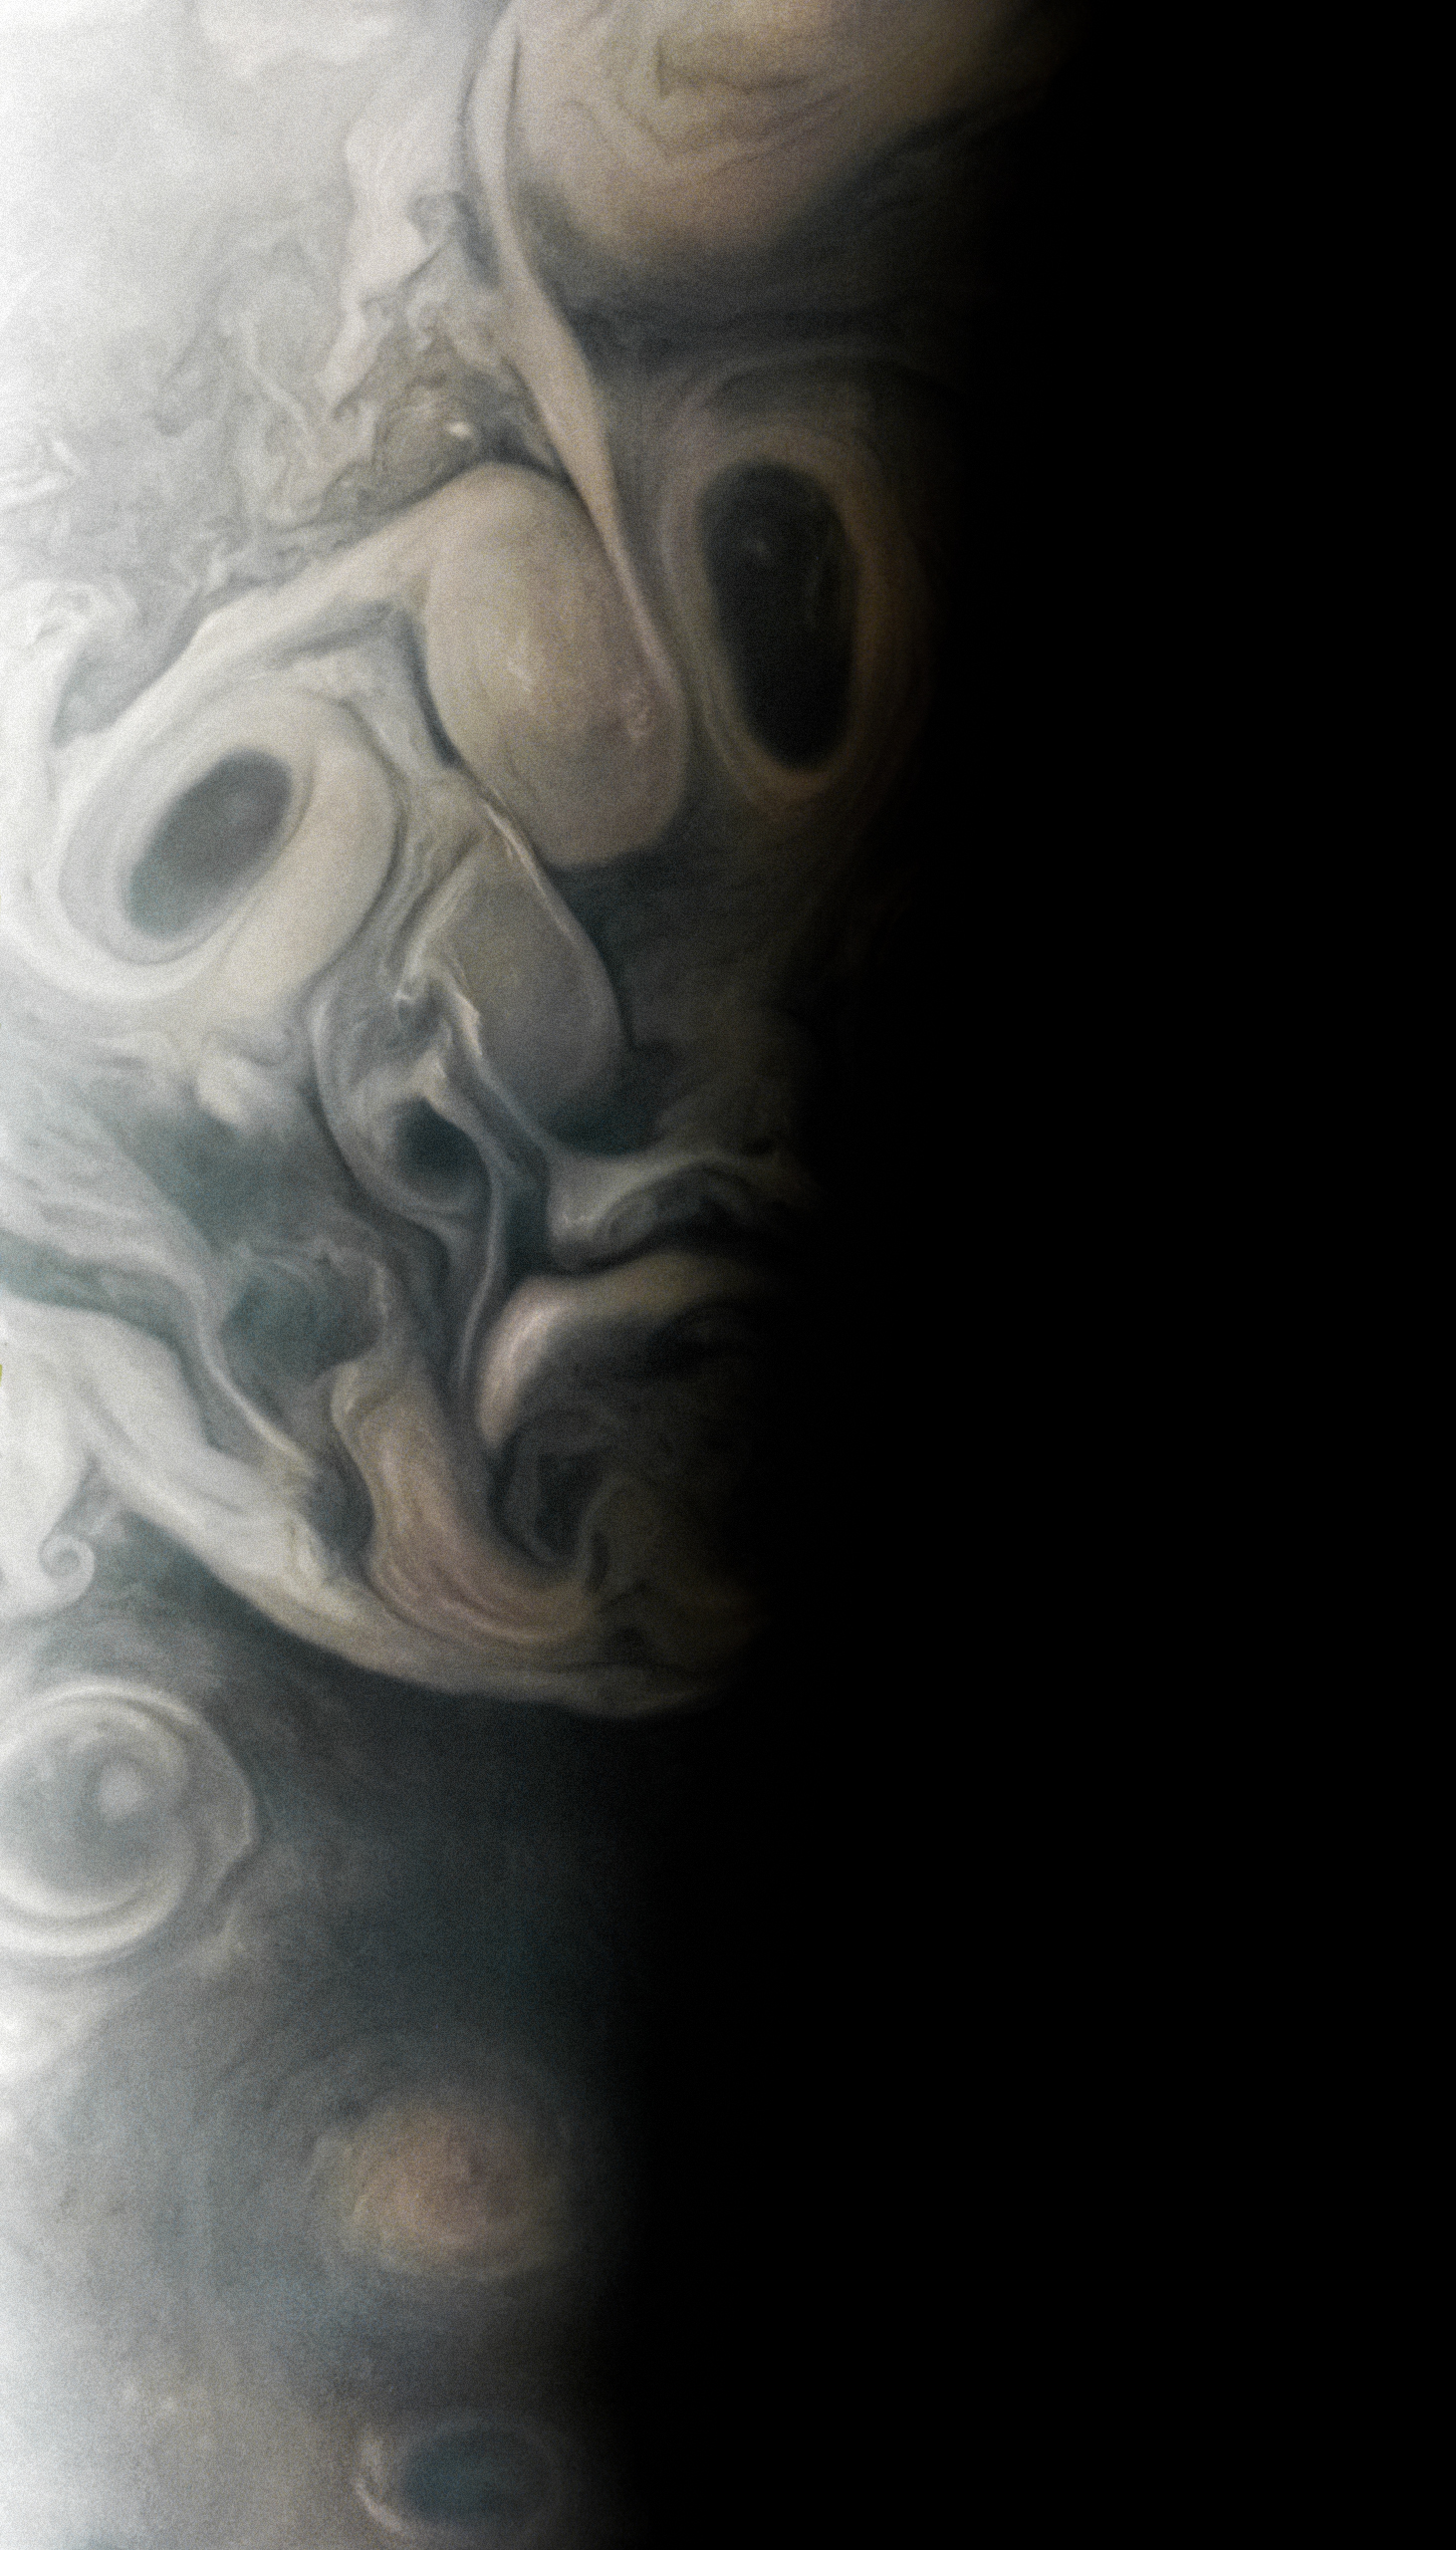 The image shows turbulent clouds and storms along Jupiter’s terminator, the dividing line between the day and night sides of the planet. The low angle of sunlight highlights the complex topography of features in this region, which scientists have studied to better understand the processes playing out in Jupiter’s atmosphere.